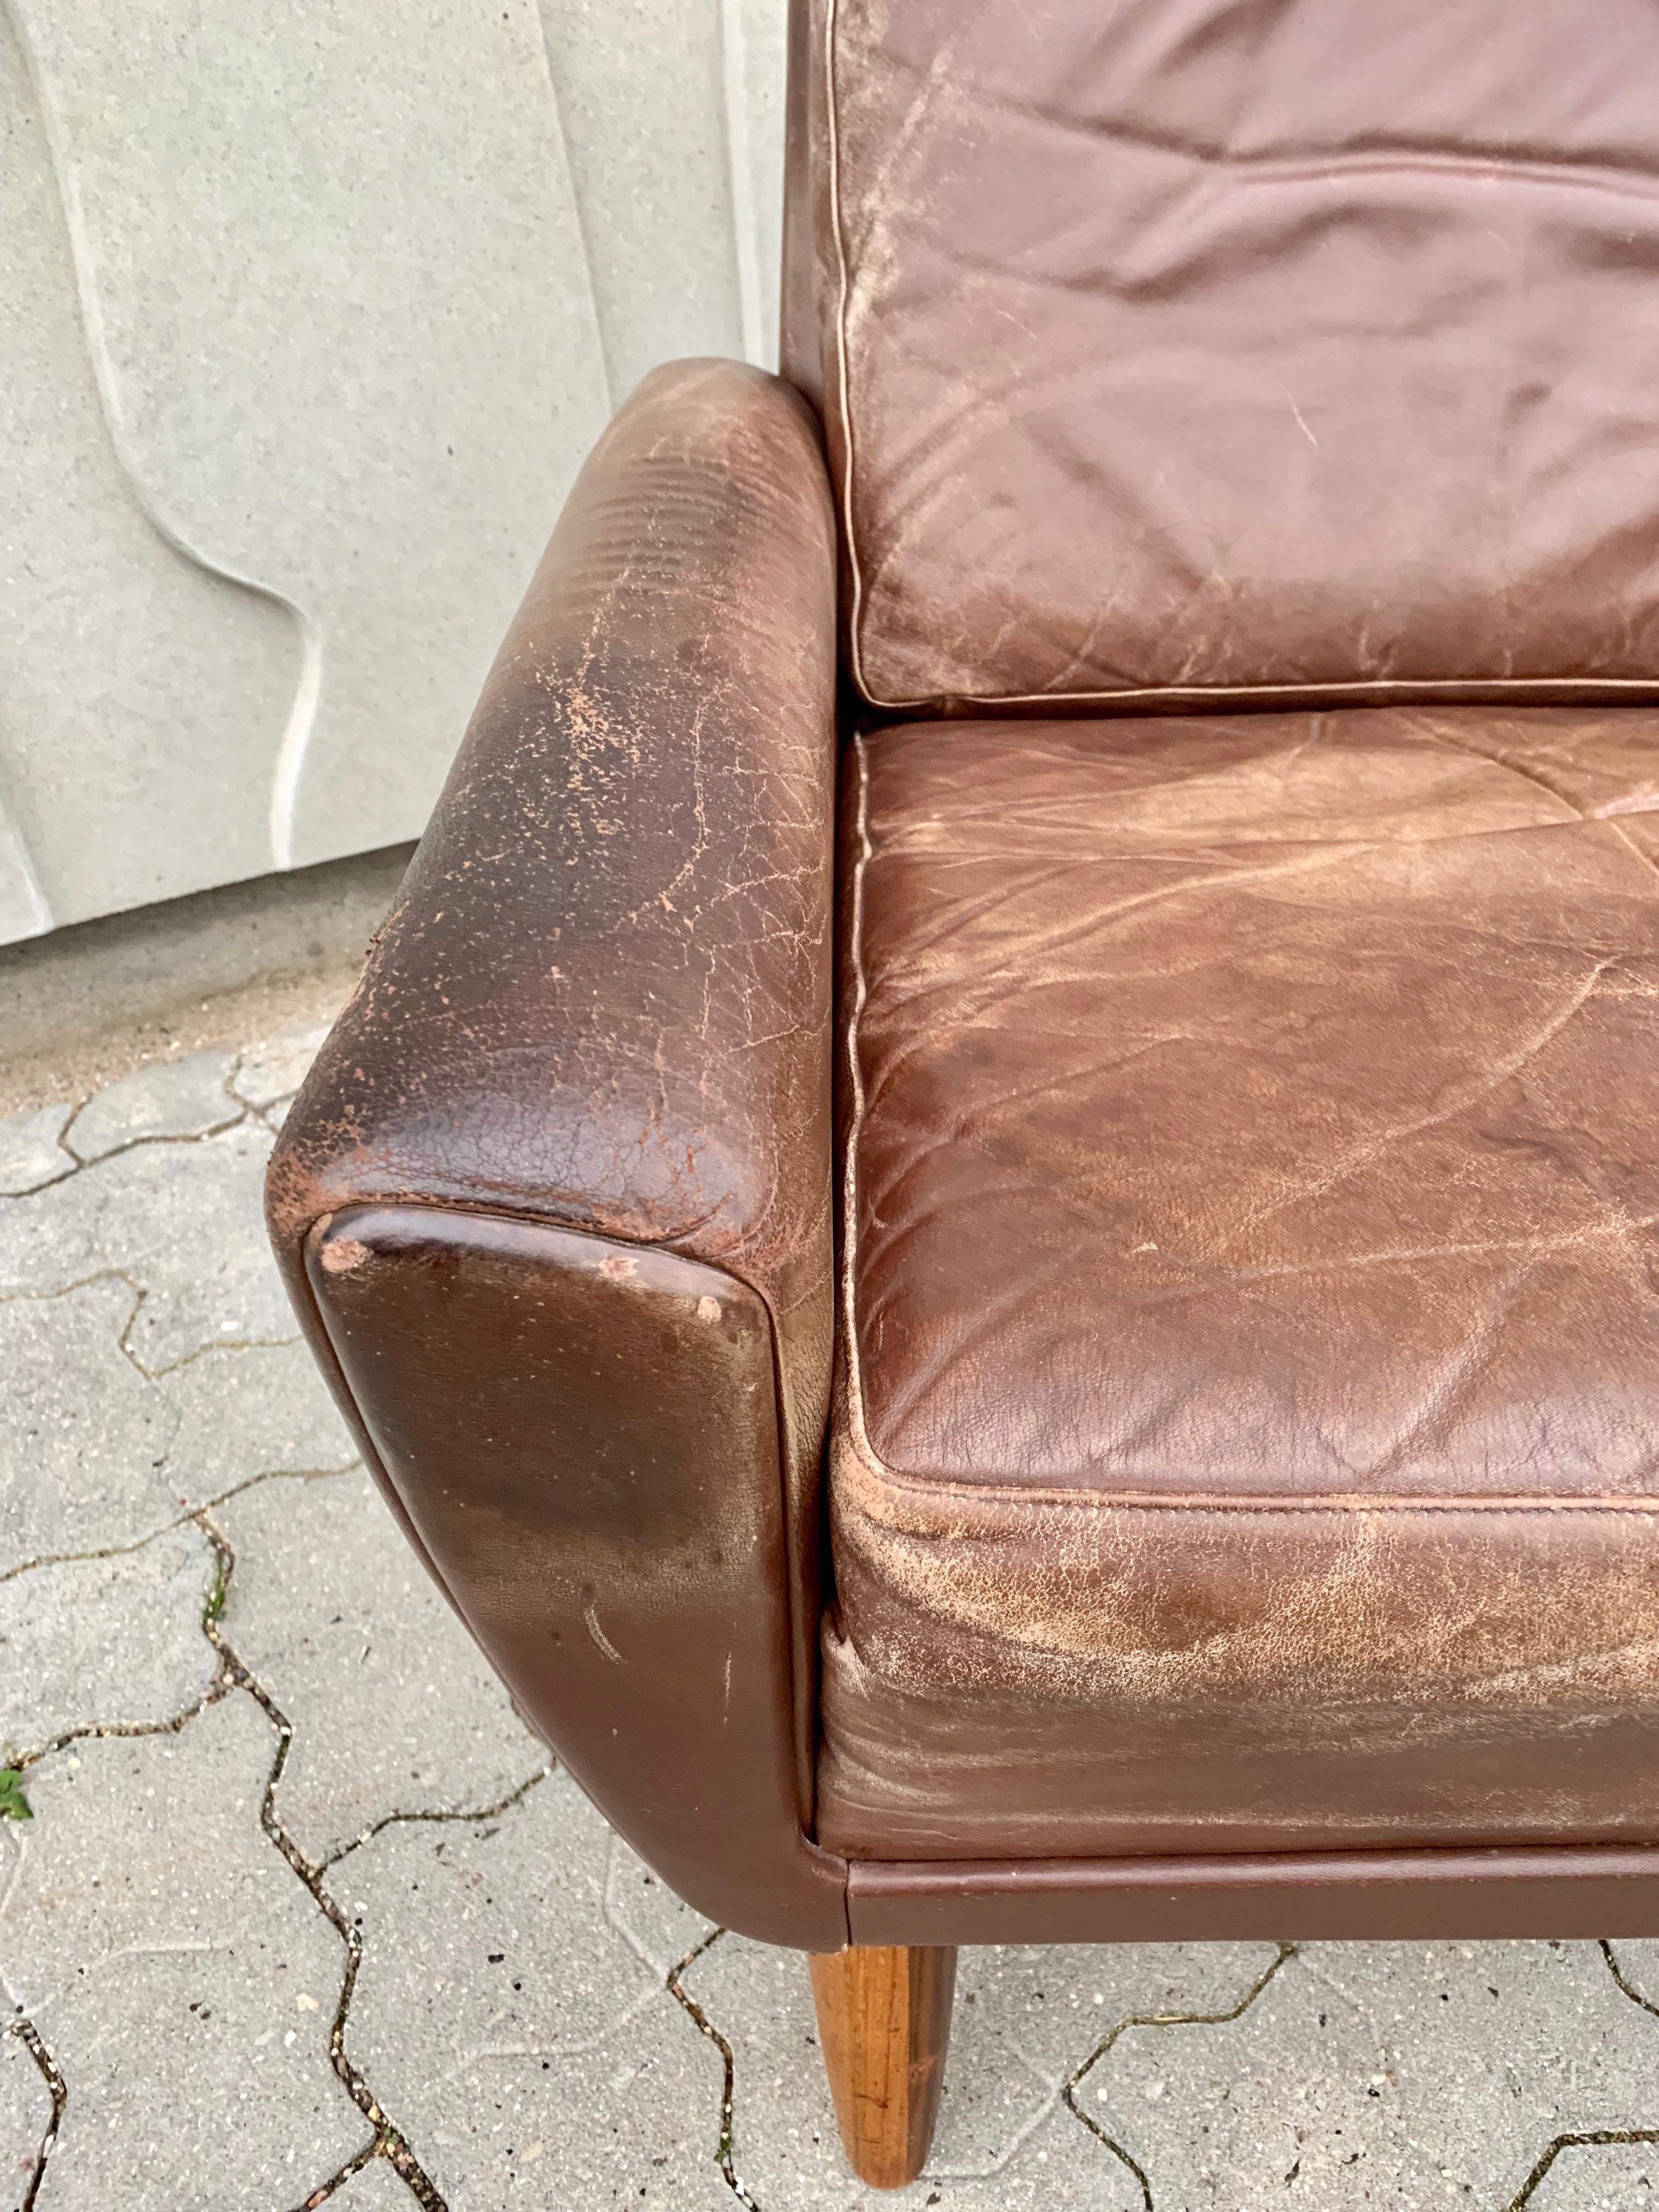 Classic Danish, 1960s easy chair designed by Georg Thams in lovely brown colored leather on tapered teak legs. Manufactured by Vejen Polstermøbelfabrik. Elegant and with great comfort. Versatile piece with the leather showing lovely patina and